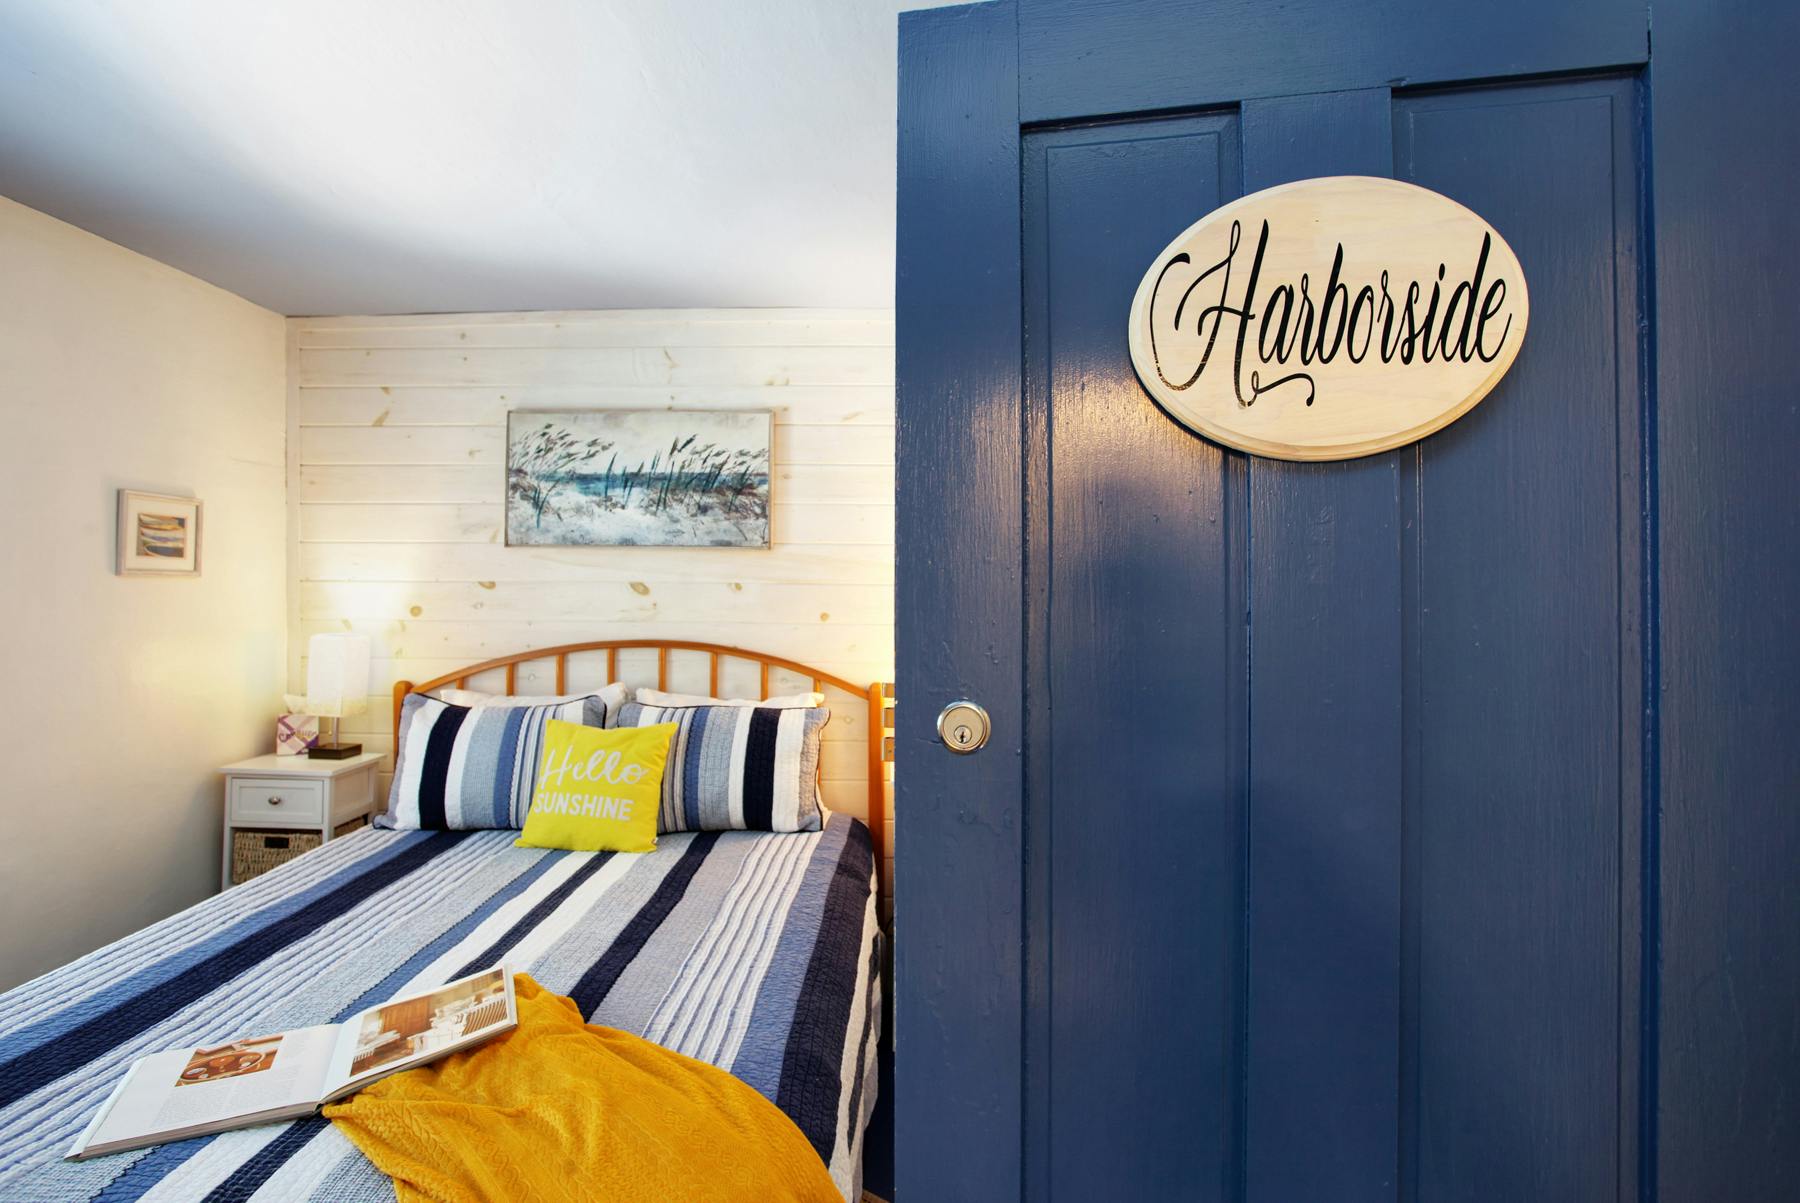 View of bedroom from doorway, bed with blue and white striped bedding with cheerful yellow accents, blue door with sign reading "Harborside"